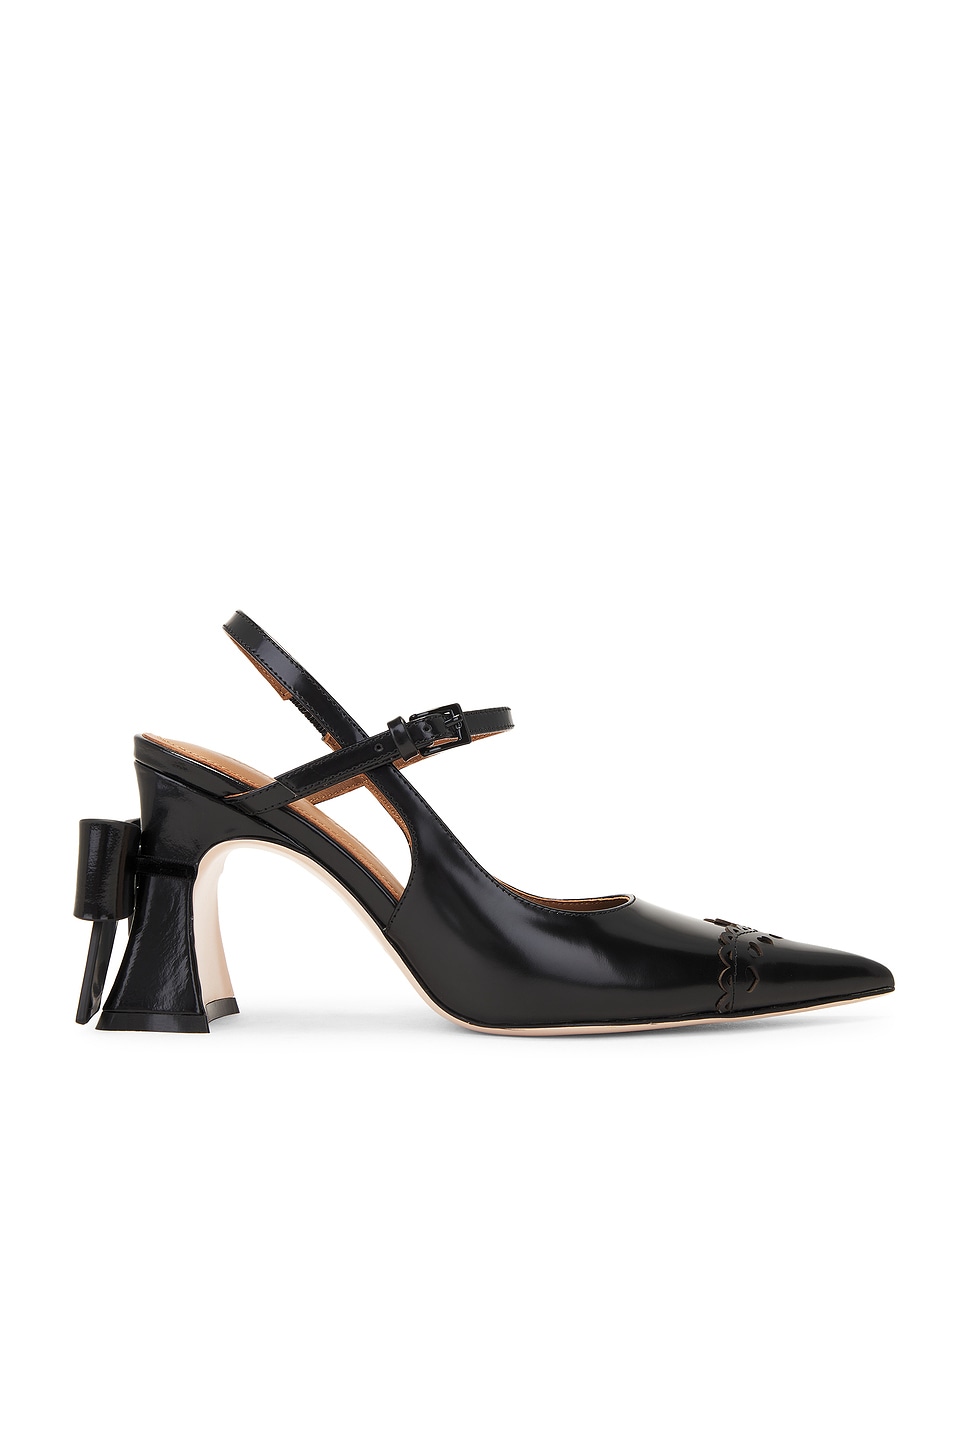 Image 1 of Shushu/Tong Bow Toe Pointed Heels in Black